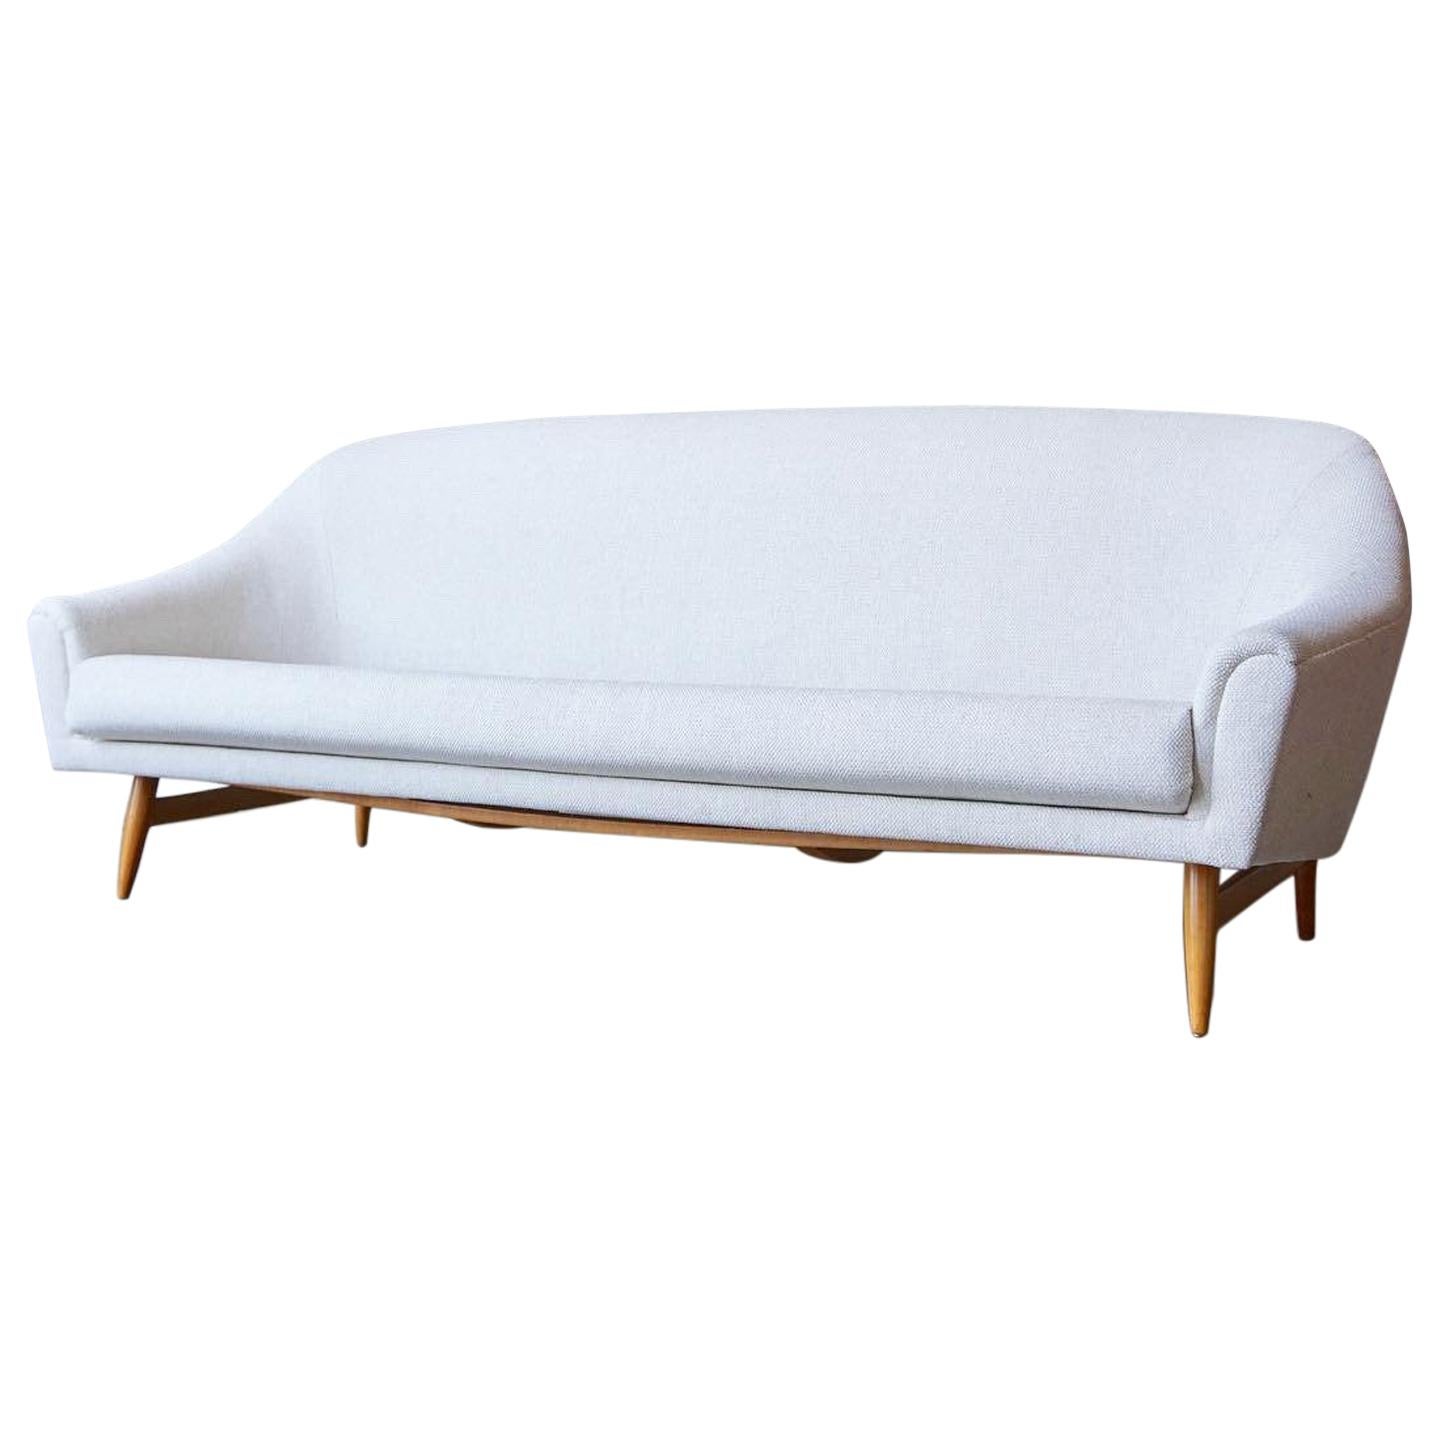 Theo Ruth Attributed Bracket Back Sofa in Off-White Tweed